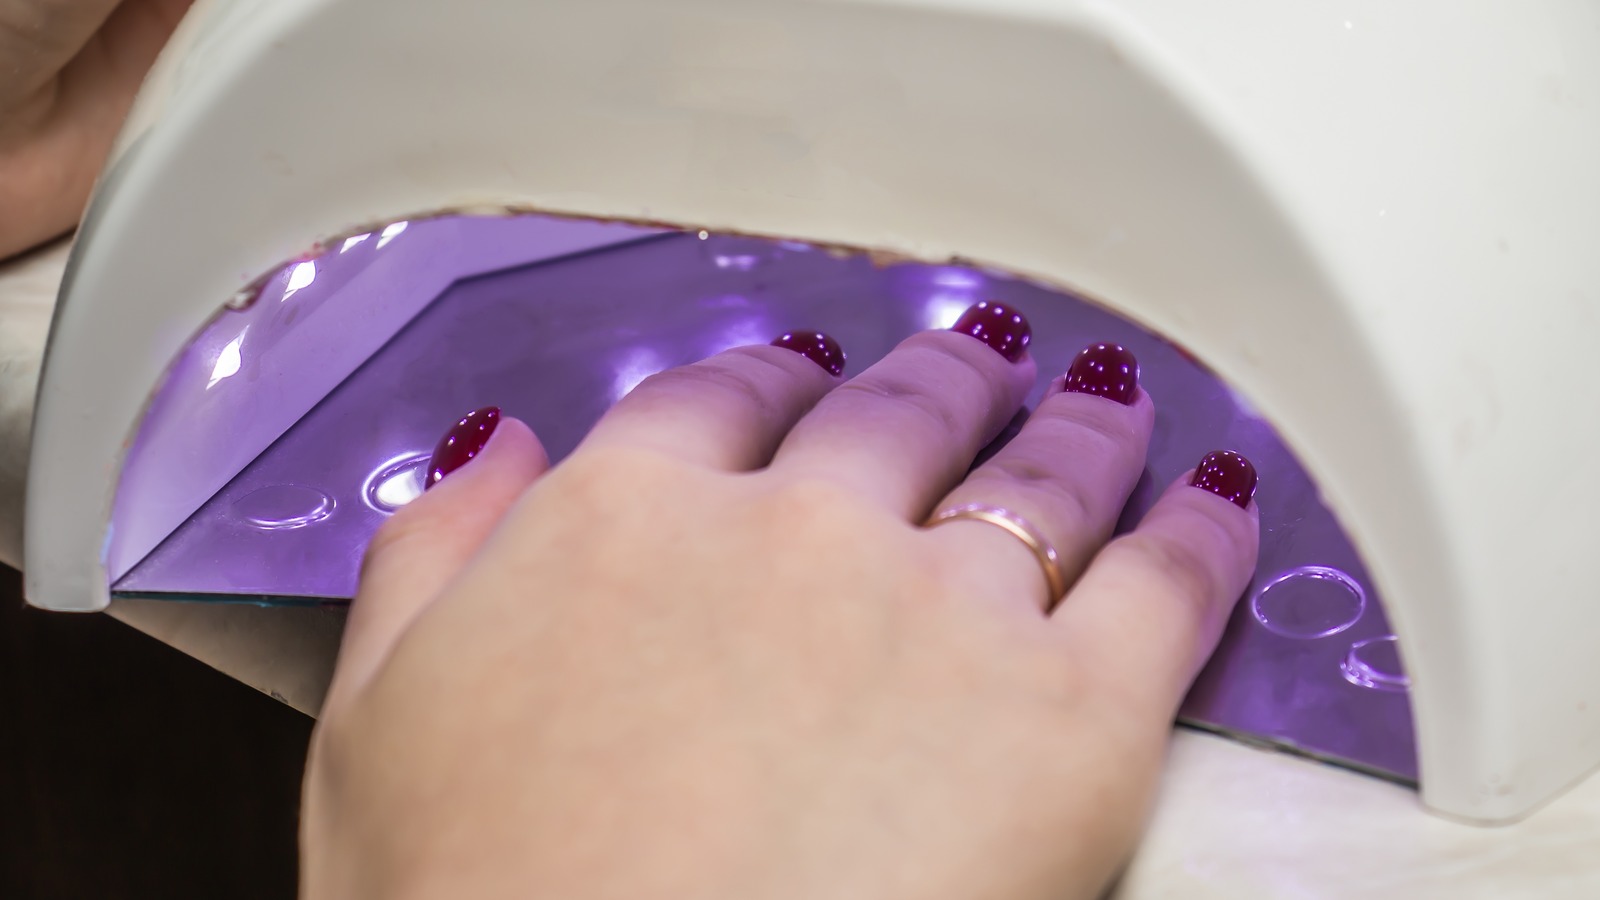 When it comes to a gel nails, should you go for a UV or LED light?